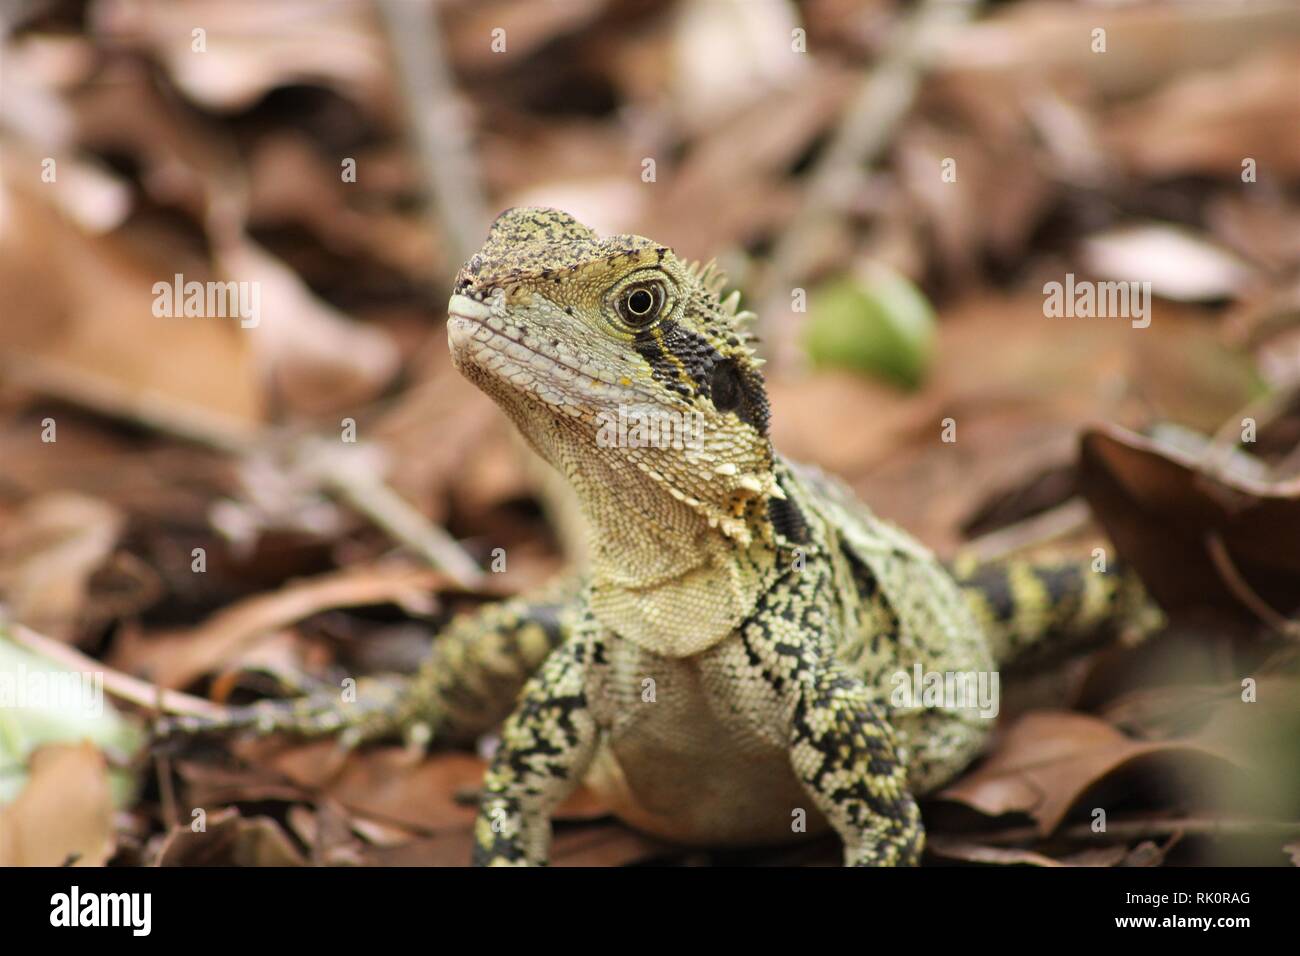 Eastern water dragon close up with brown background of leaves and sticks. Stock Photo